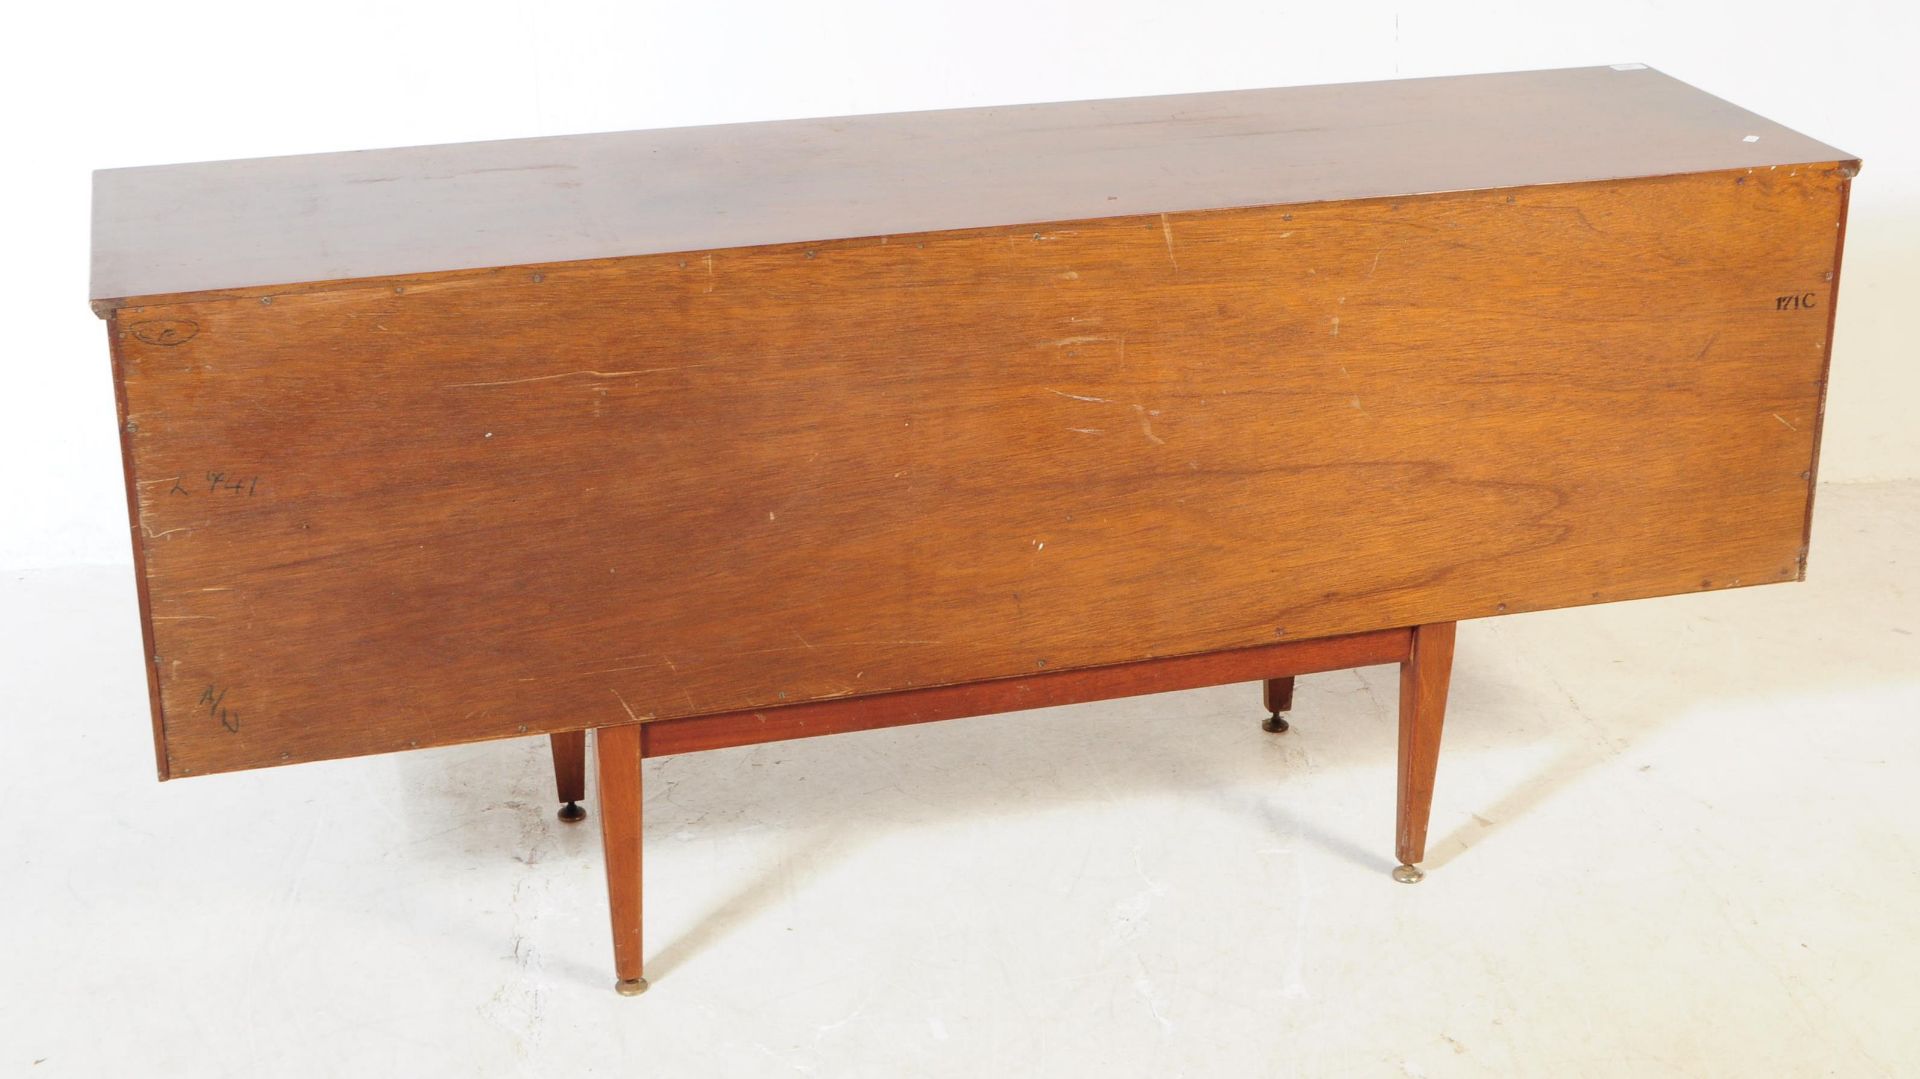 JENTIQUE FURNITURE - RETRO MID 20TH CENTURY SIDEBOARD - Image 7 of 7